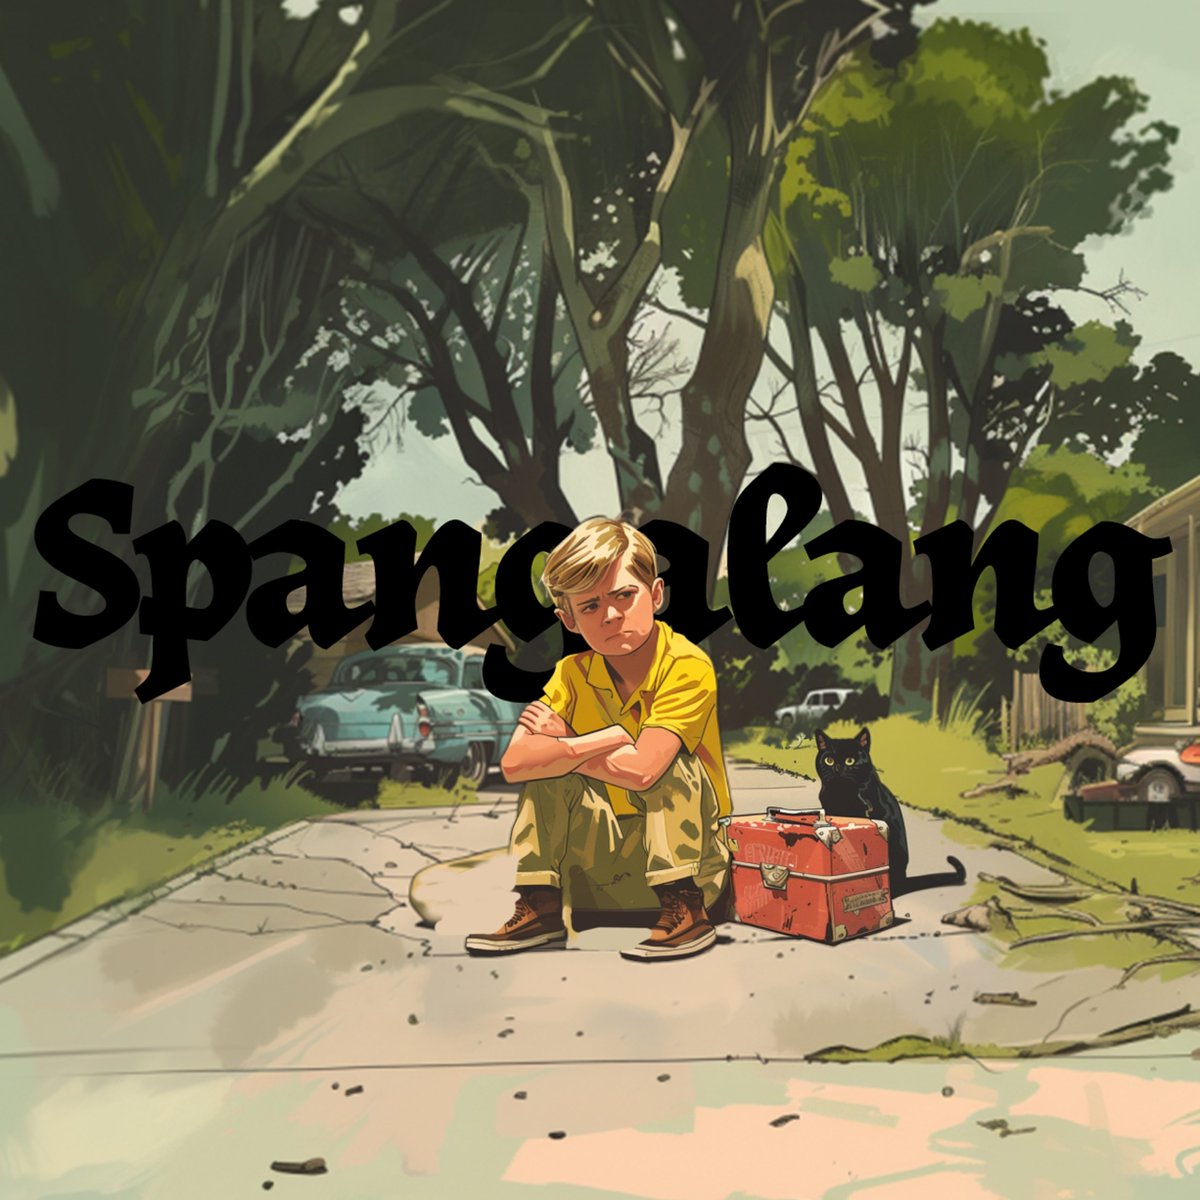 Turn up the volume, hit play, and let SUSAN the Band take you on a wild ride with 'Spangalang'. #indiedockmusicblog #garagerock eu1.hubs.ly/H09j1B70